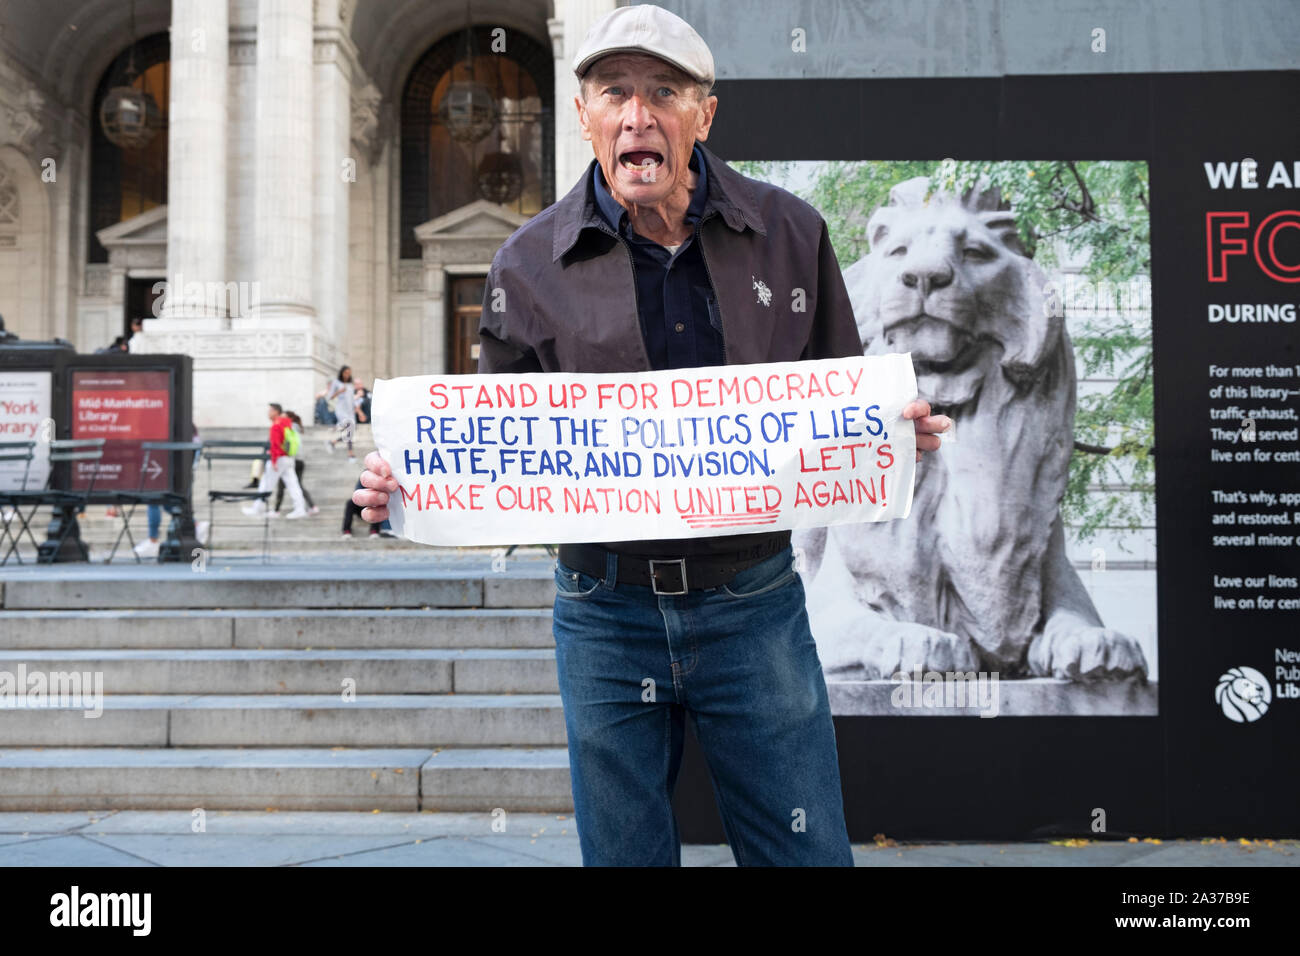 An anti Trump septuagenarian war veteran lectured tourists and passersby bout democracy. In front of the Main Library on Fifth Ave in Midtown, NYC. Stock Photo